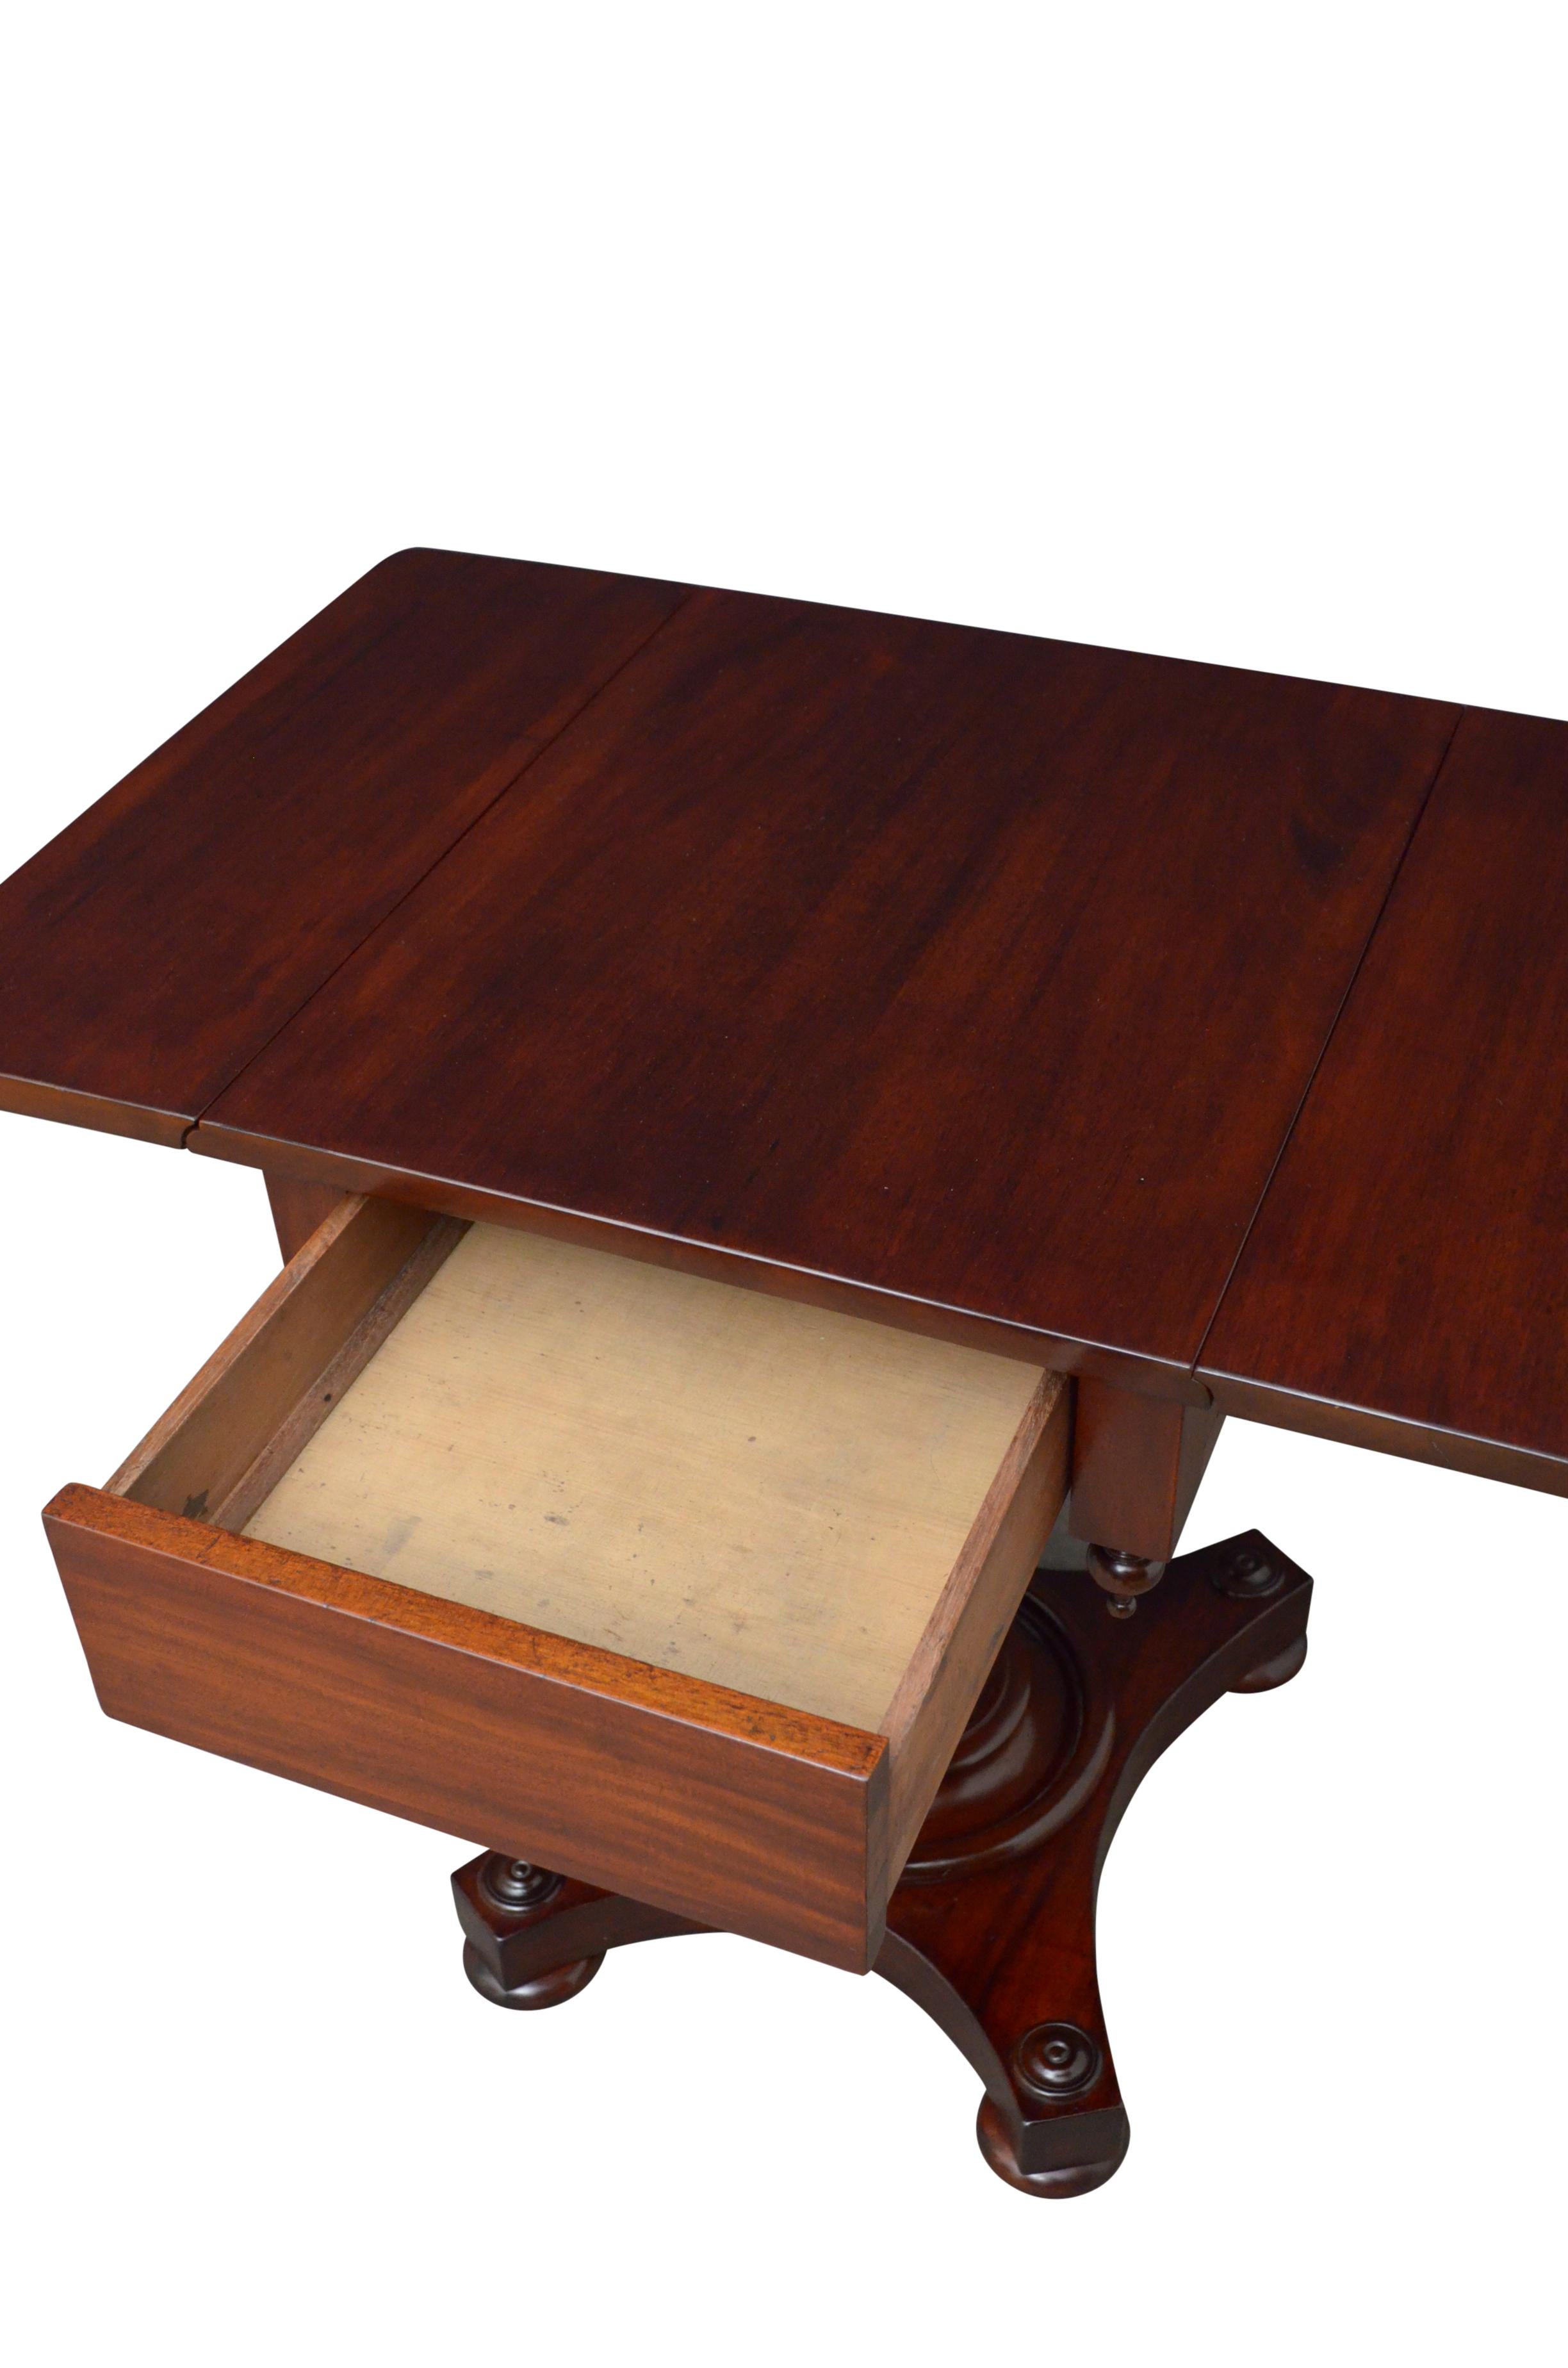 Mid-19th Century William IV / Early Victorian Mahogany Drop Leaf Table For Sale